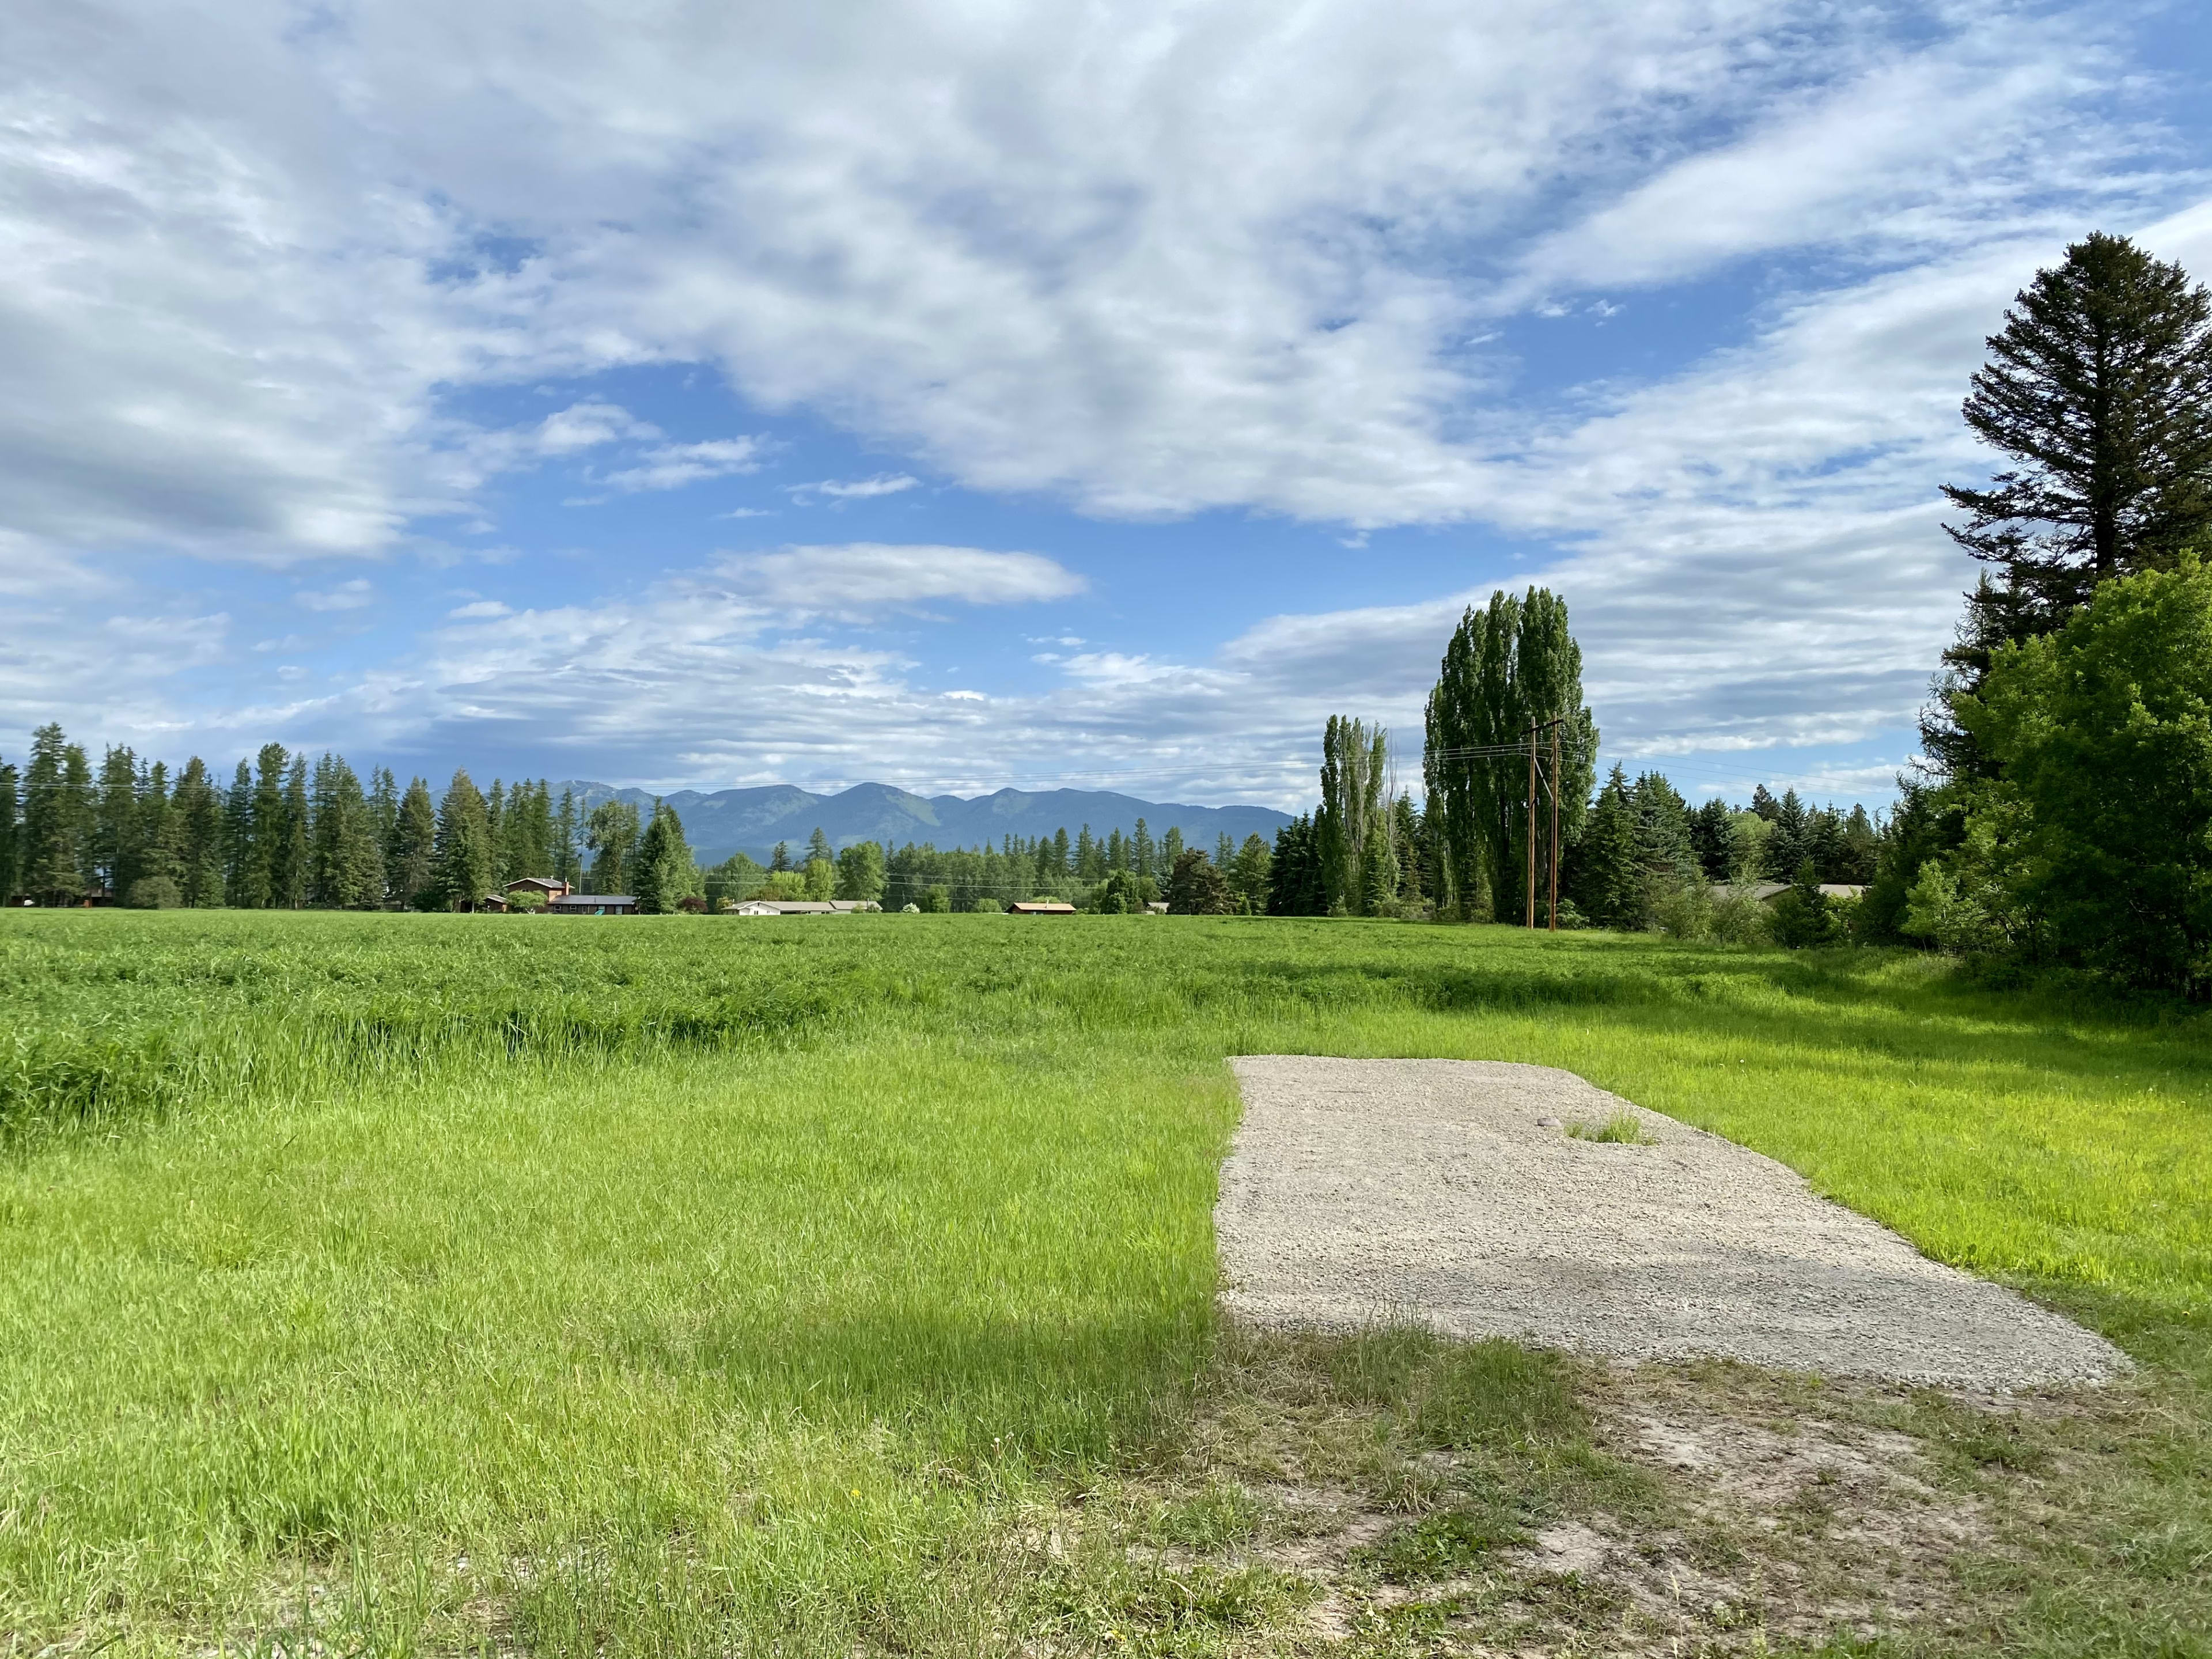 Parking site with views of the Whitefish Range.